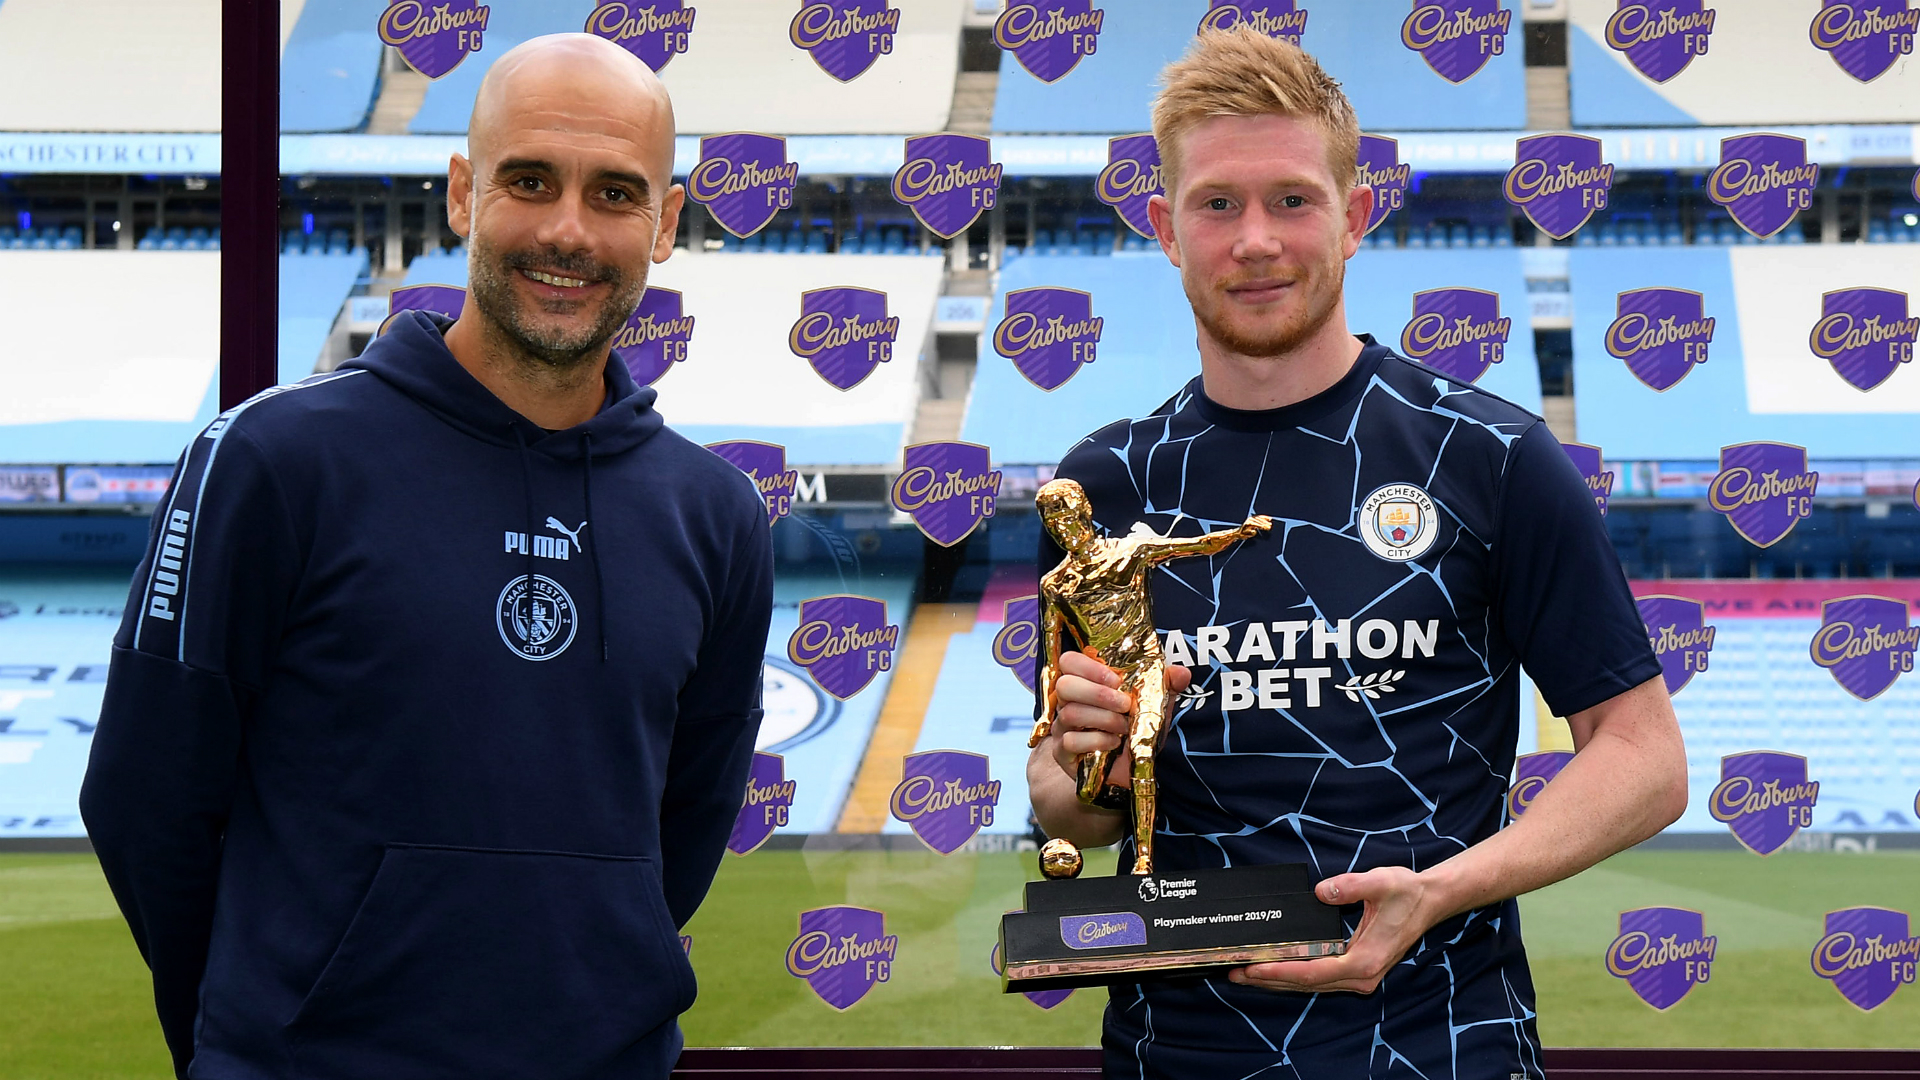 'You took two away from me!' - De Bruyne happy to share Premier League assists record with Henry